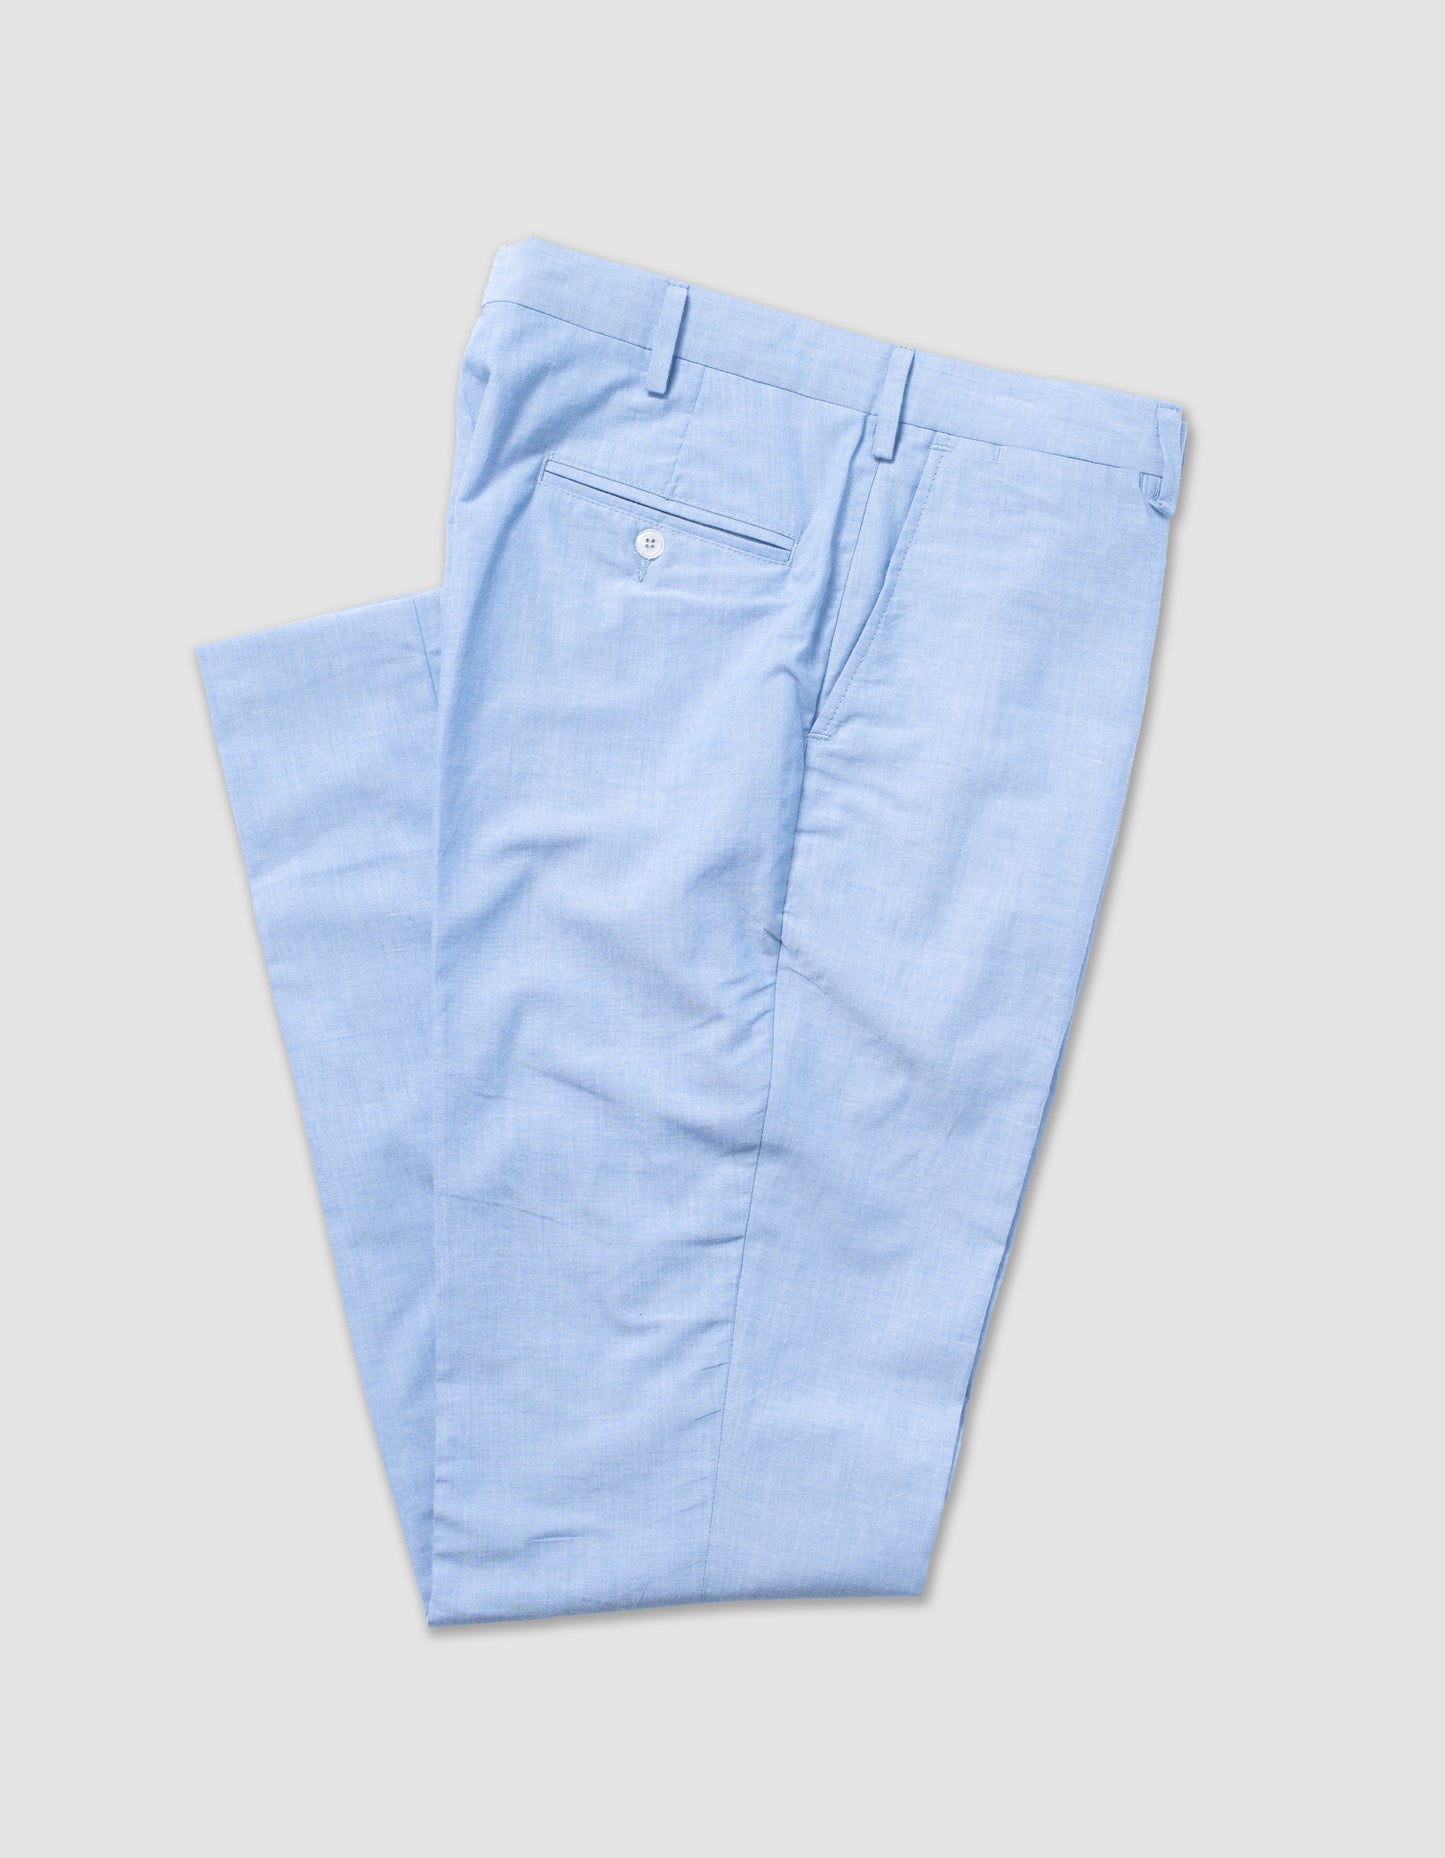 BLUE CHAMBRAY PANT - CLASSIC FIT